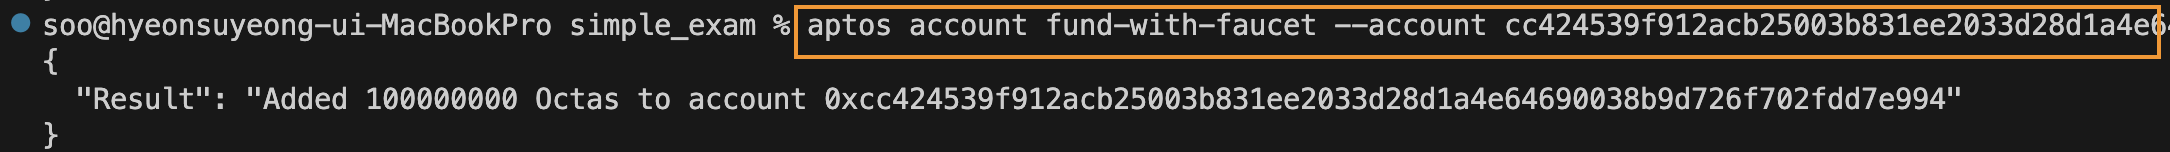 fund-with-faucet